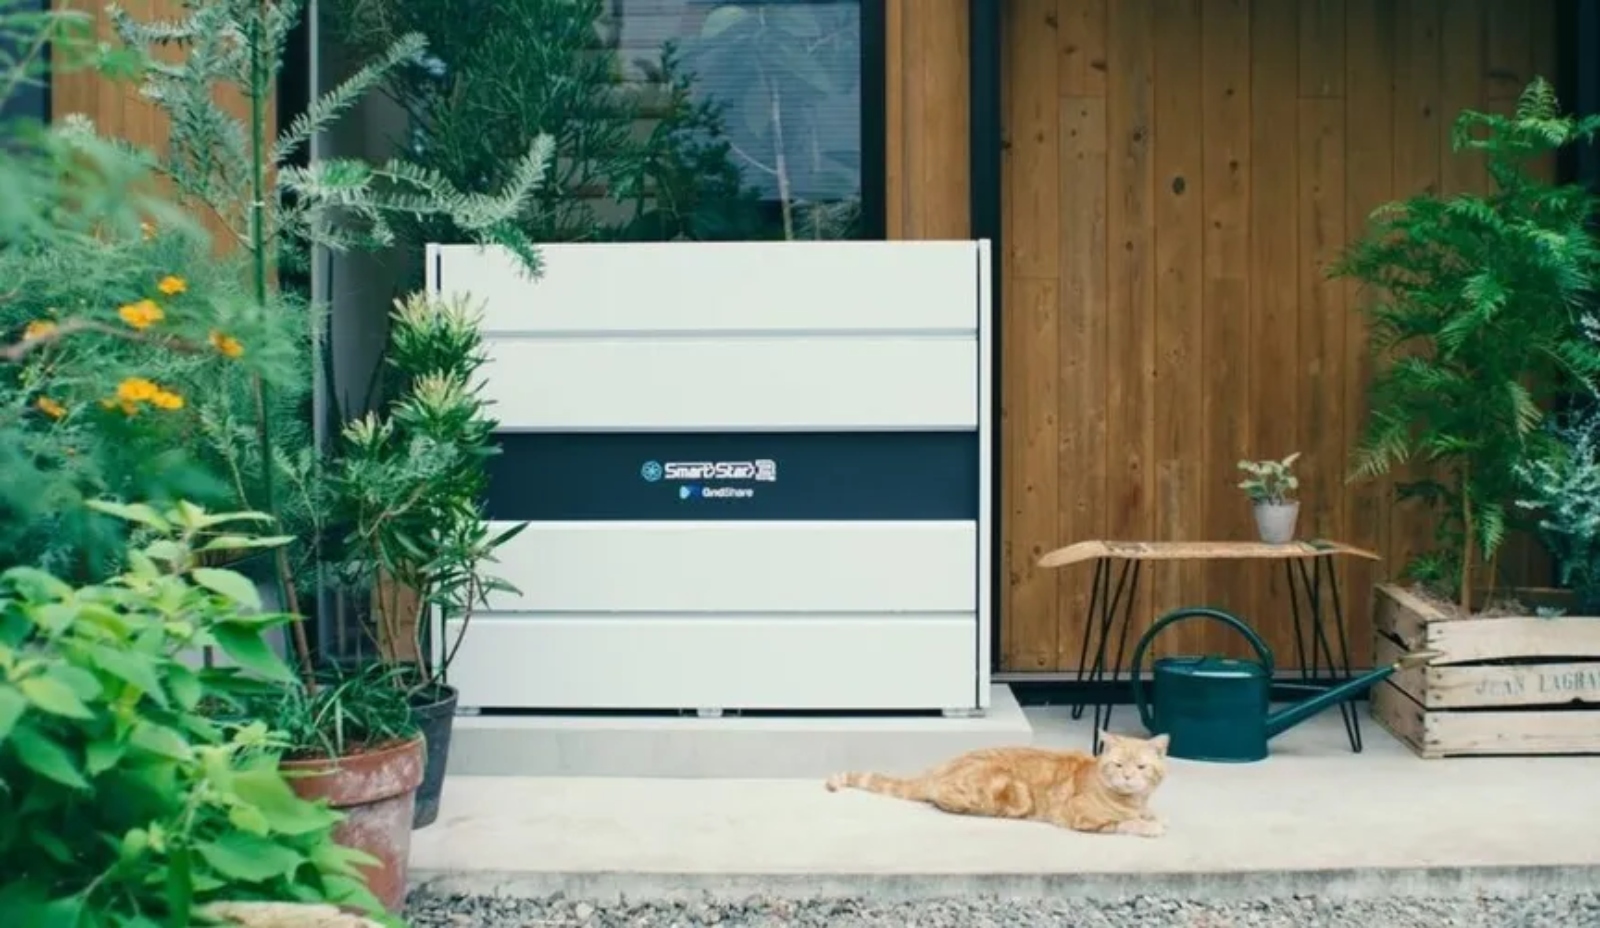 A peach-colored tabby cat lies in front of a white box on a doorstep.